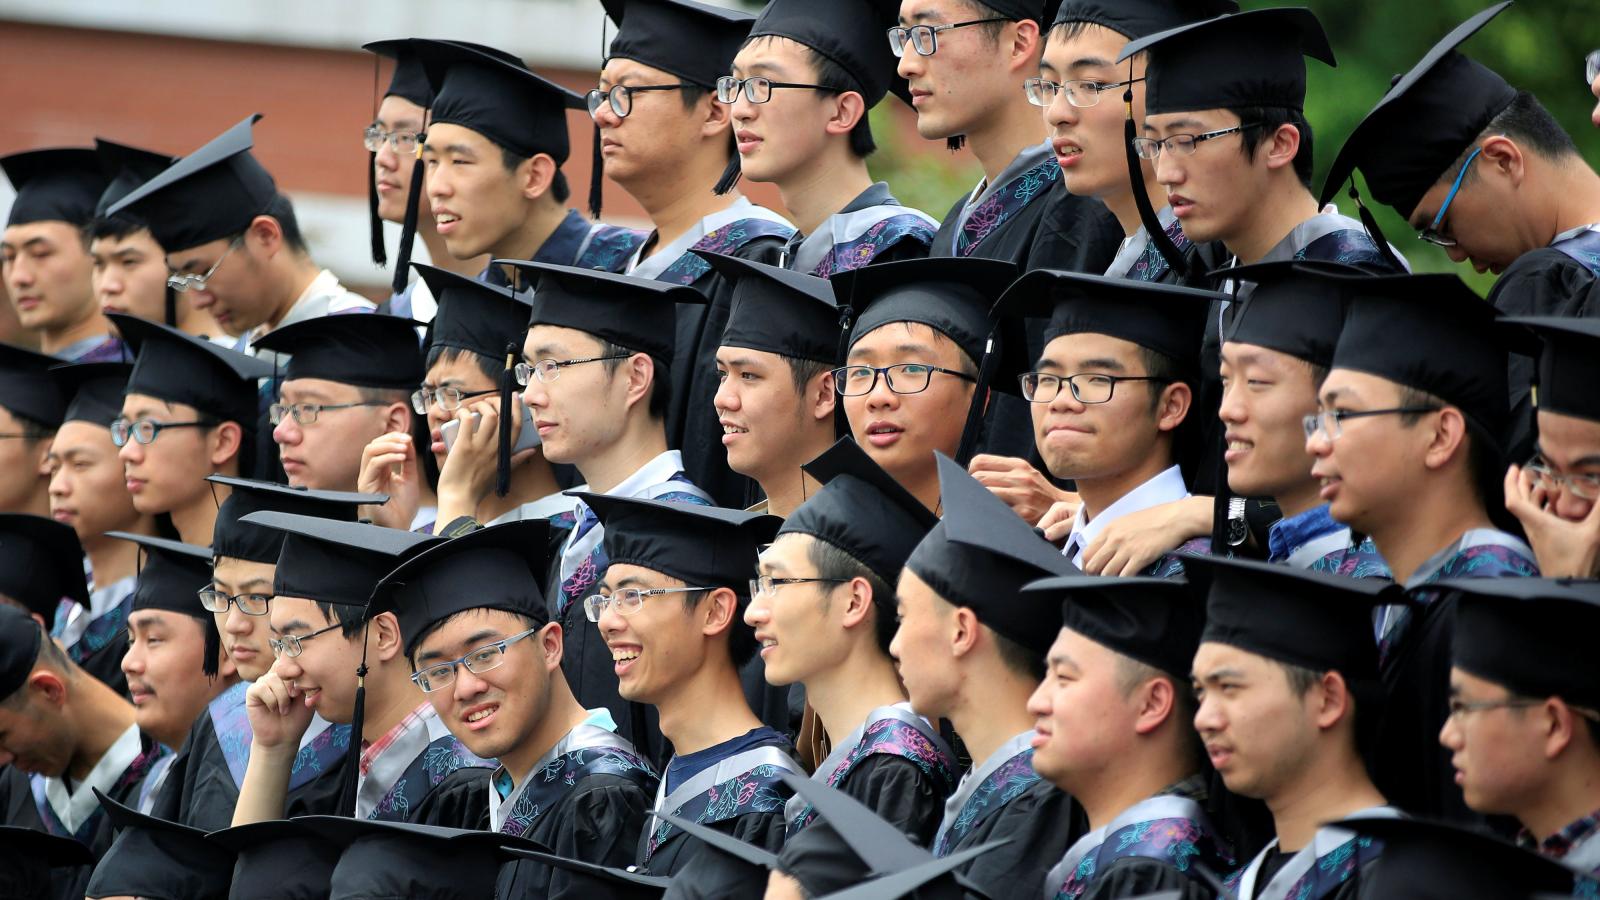 us-state-department-revokes-visas-of-more-than-1,000-chinese-students